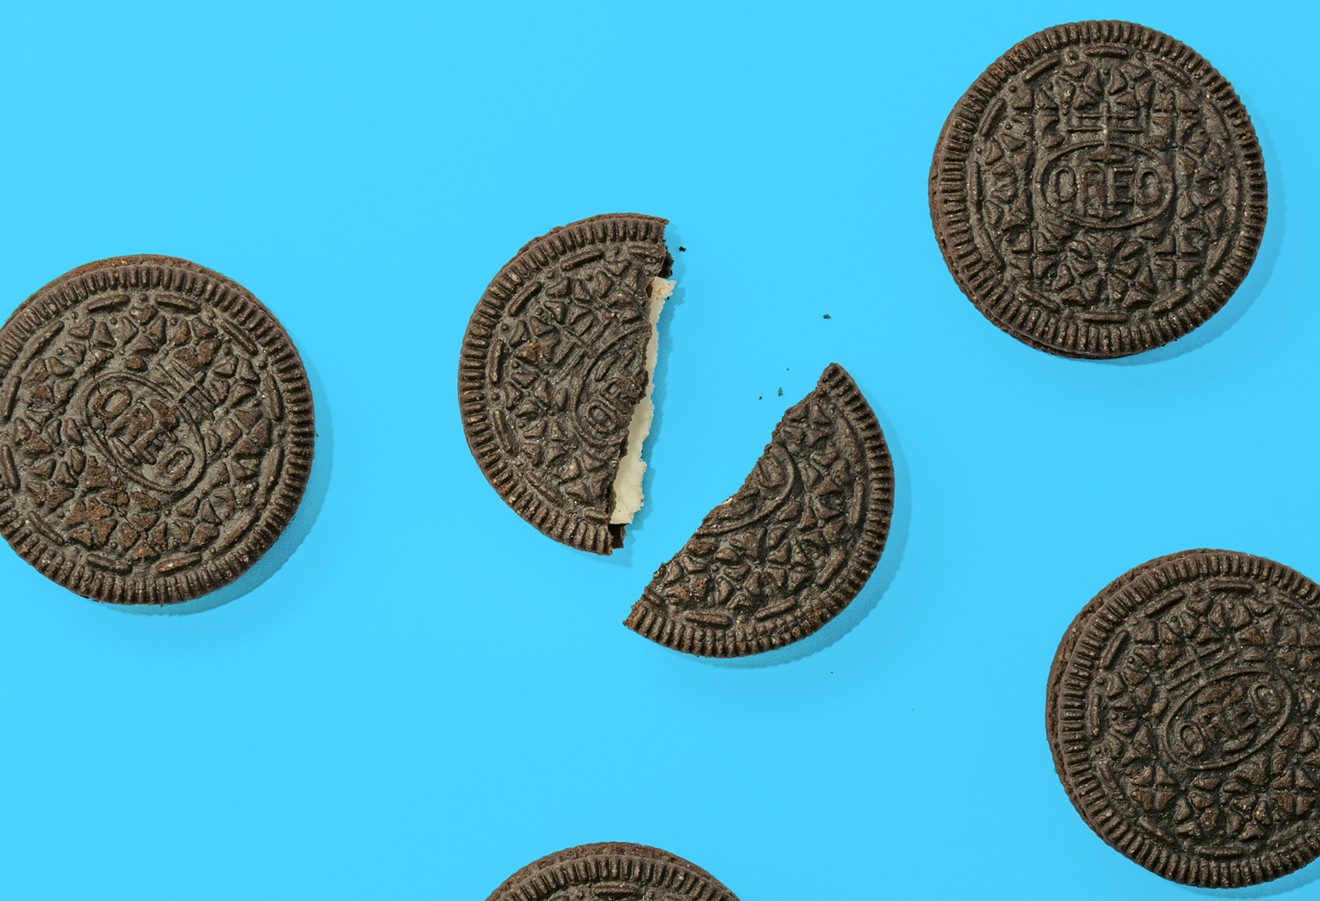 Oreo offerings have exploded in recent years, from gluten-free versions to a long list of new flavors, but trademark owner Mondelez International isn't keen on expanding into the cannabis trade yet.